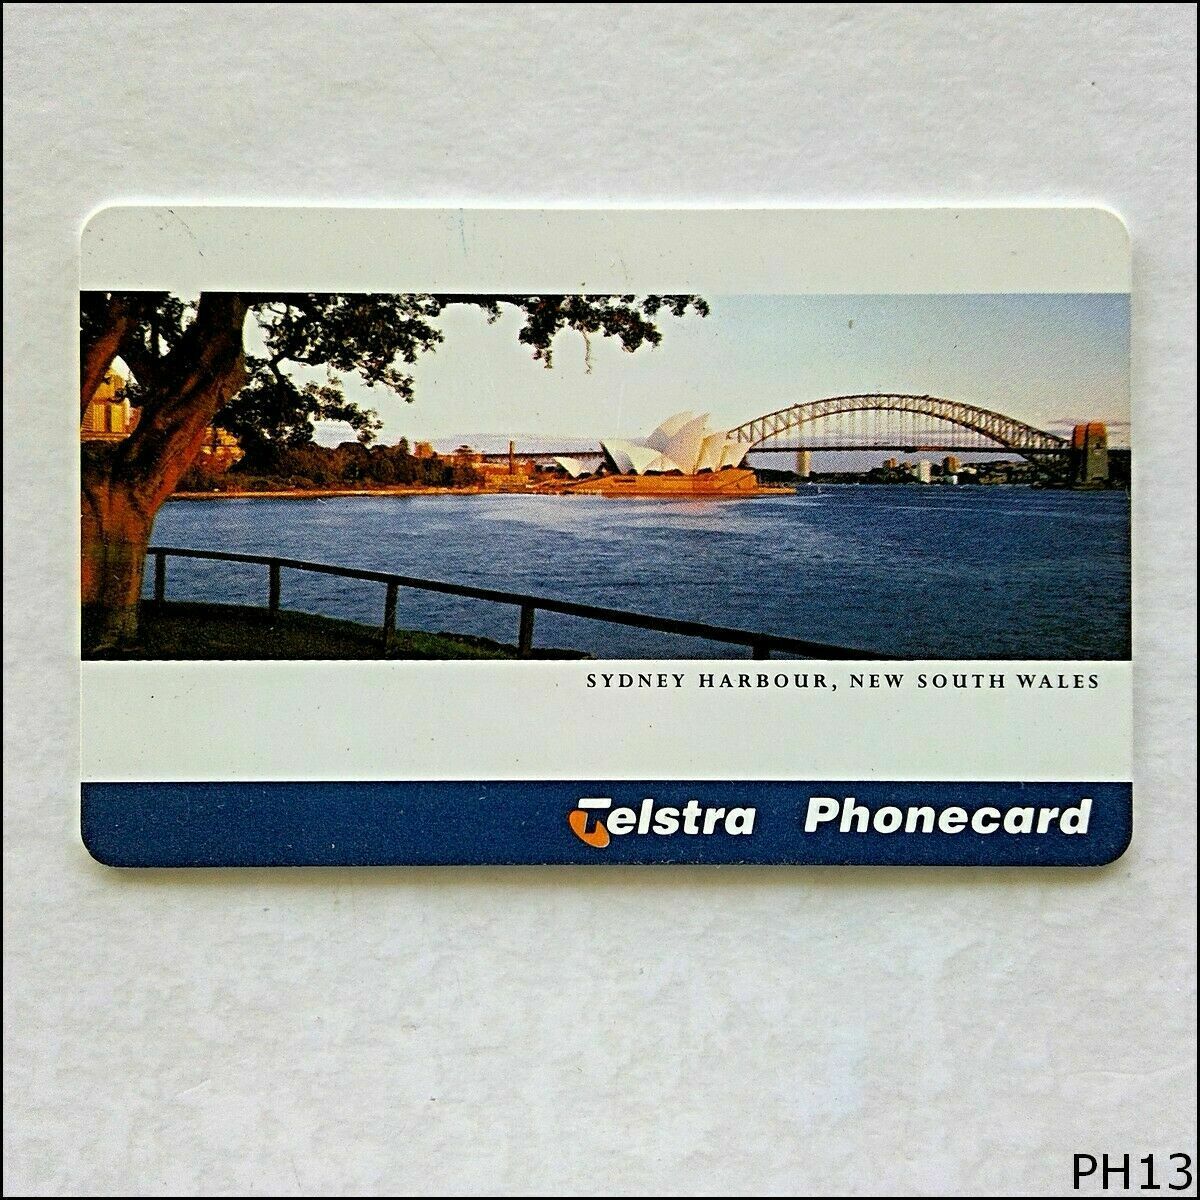 Telstra Sydney Harbour New South Wales 97005009n $5 Phonecard (ph13)